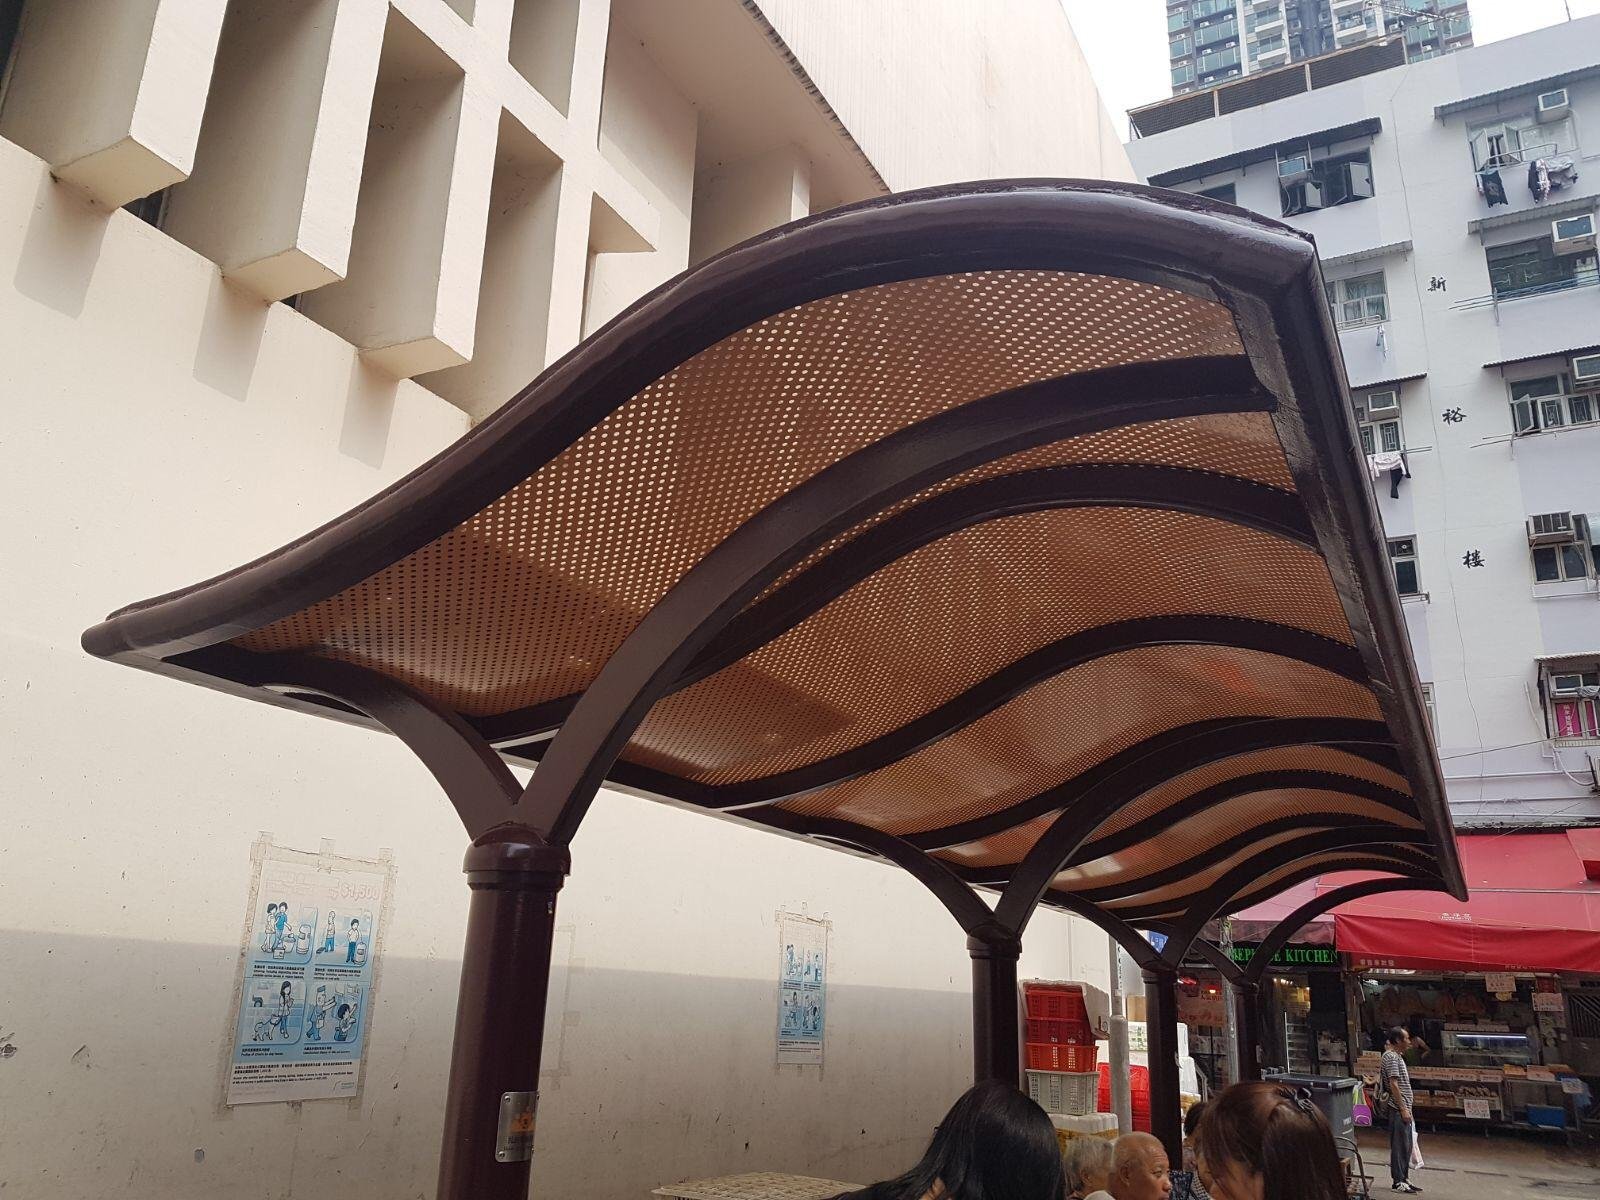 Hong Kong Bus station shelter pavilion pavilion stainless steel works iron works 5